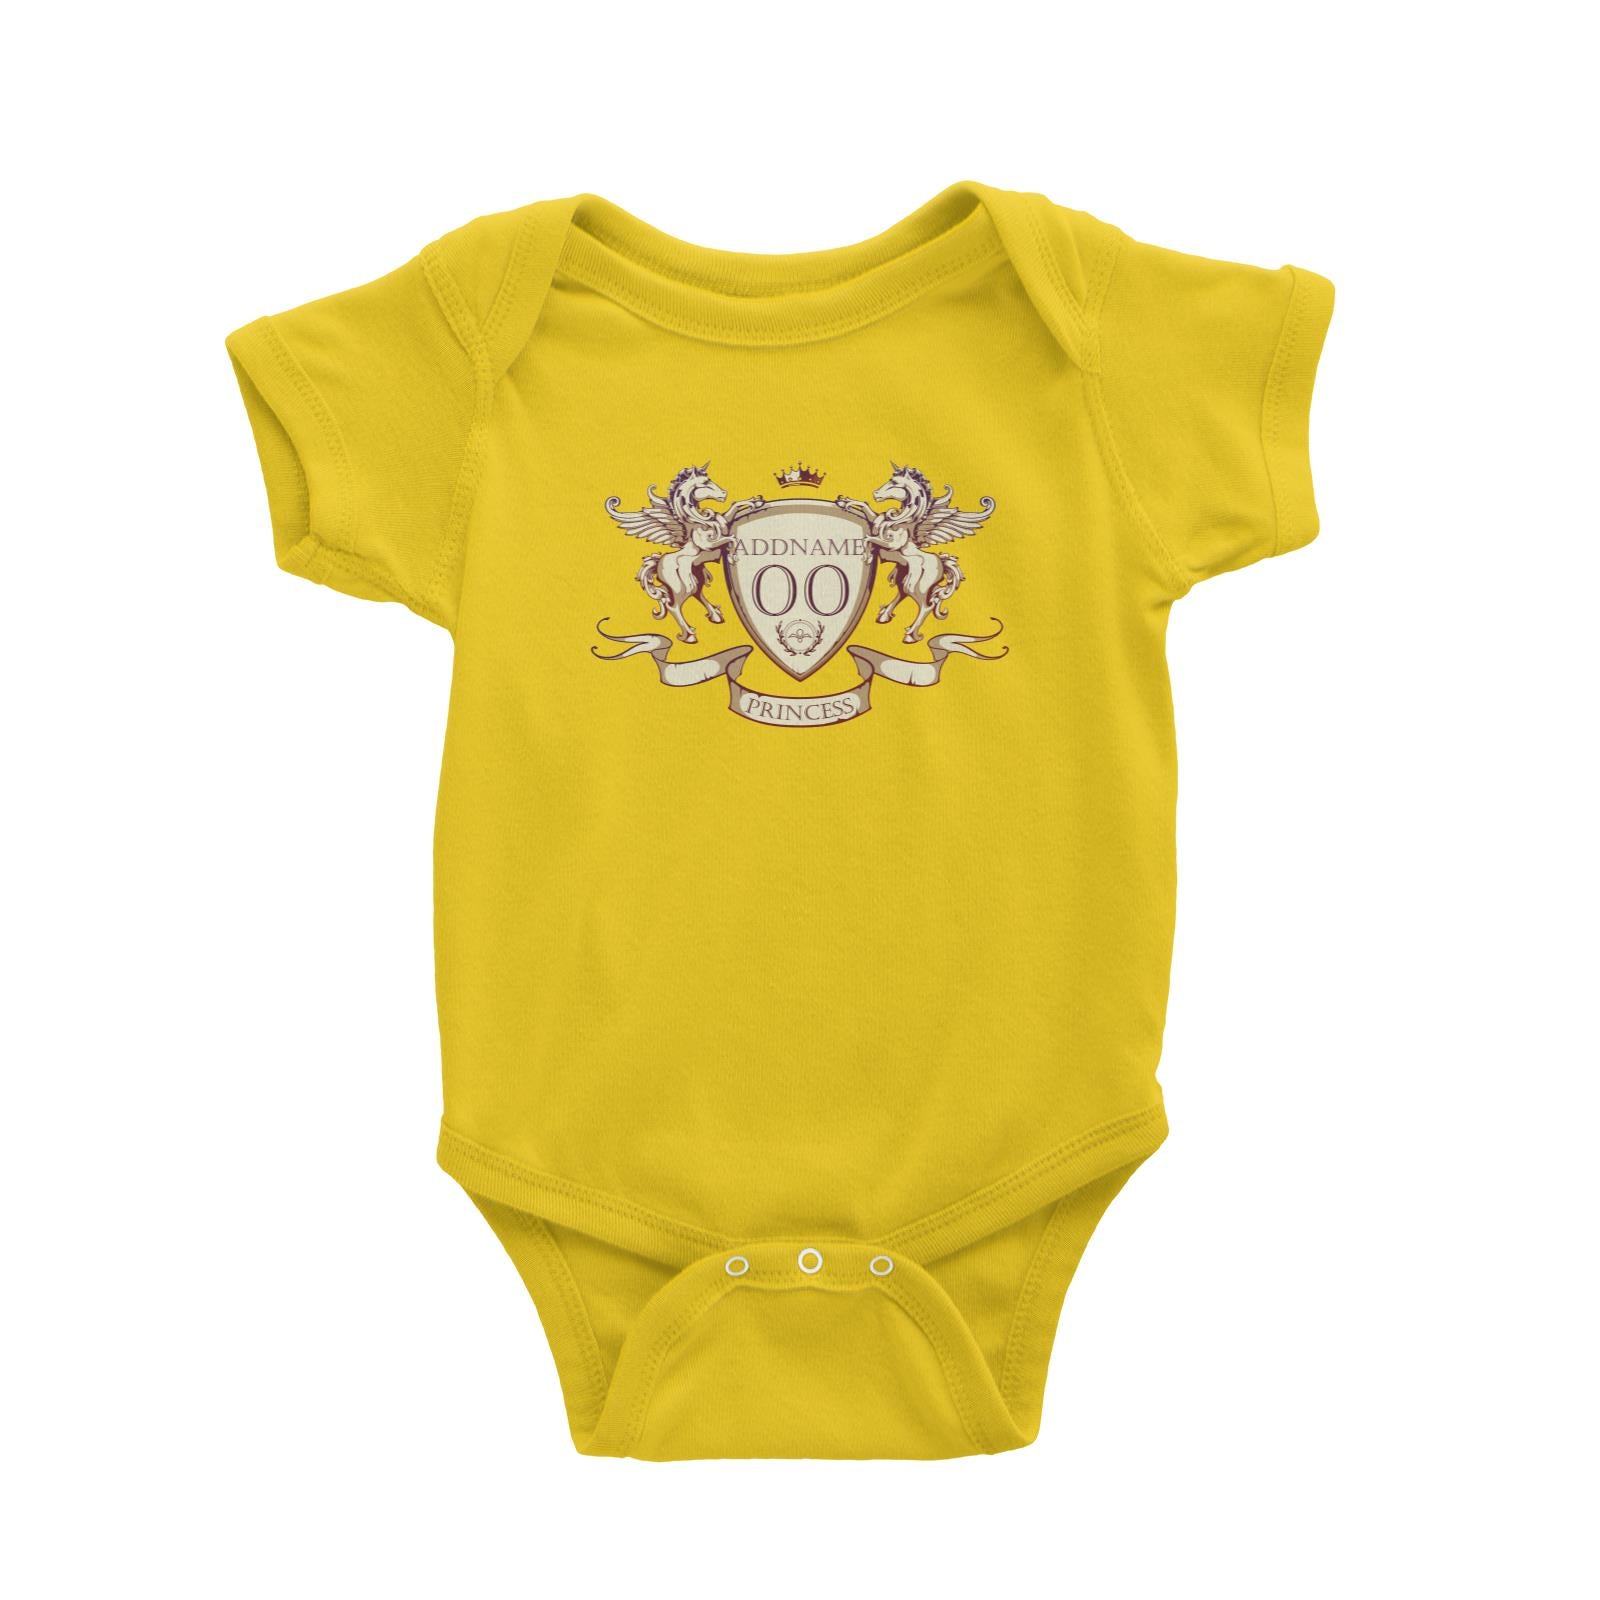 Horse Royal Emblem Princess Personalizable with Name and Number Baby Romper